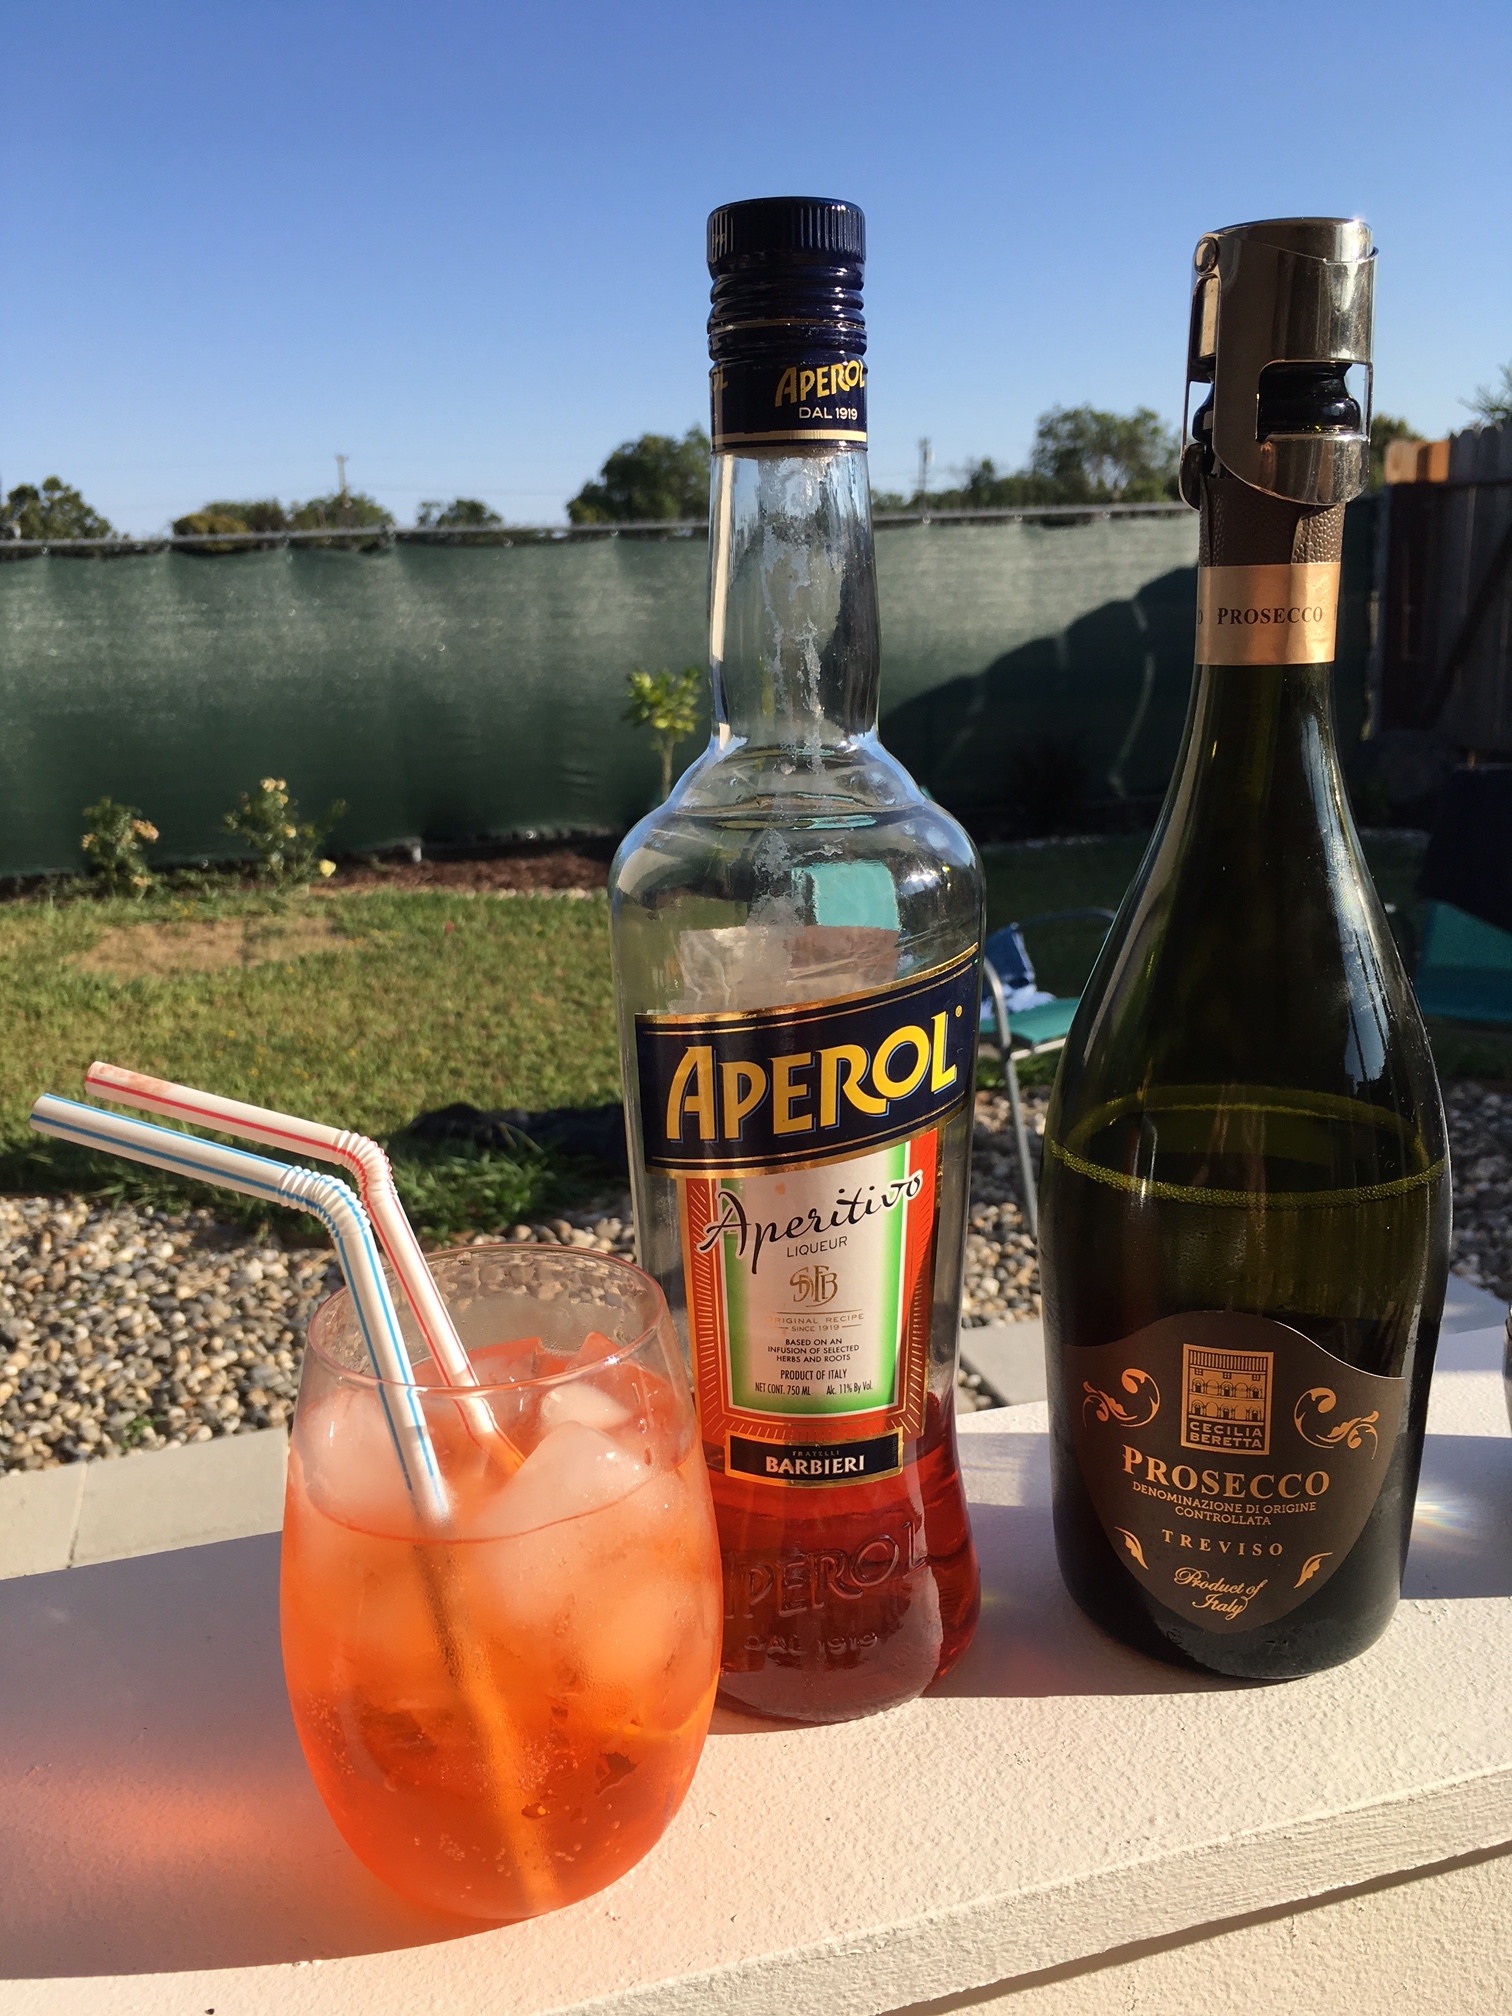 Aperol Spritz – The Perfect Summer Drink! – That Drinking Show